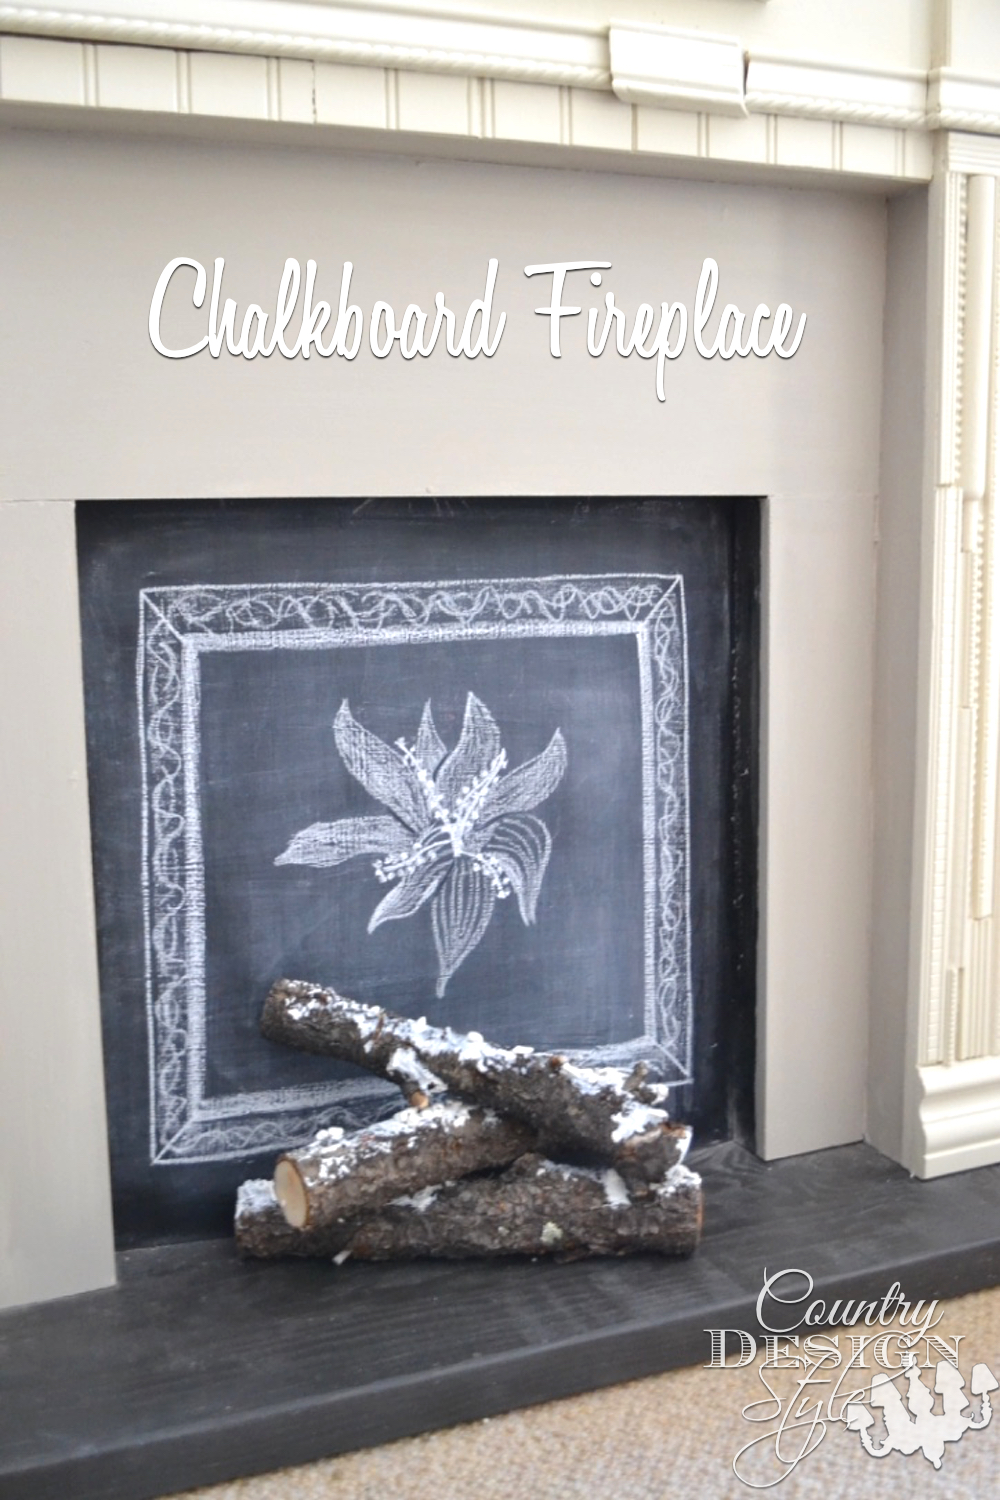 Framed plates and chalkboard fireplace | Country Design Style | countrydesignstyle.com